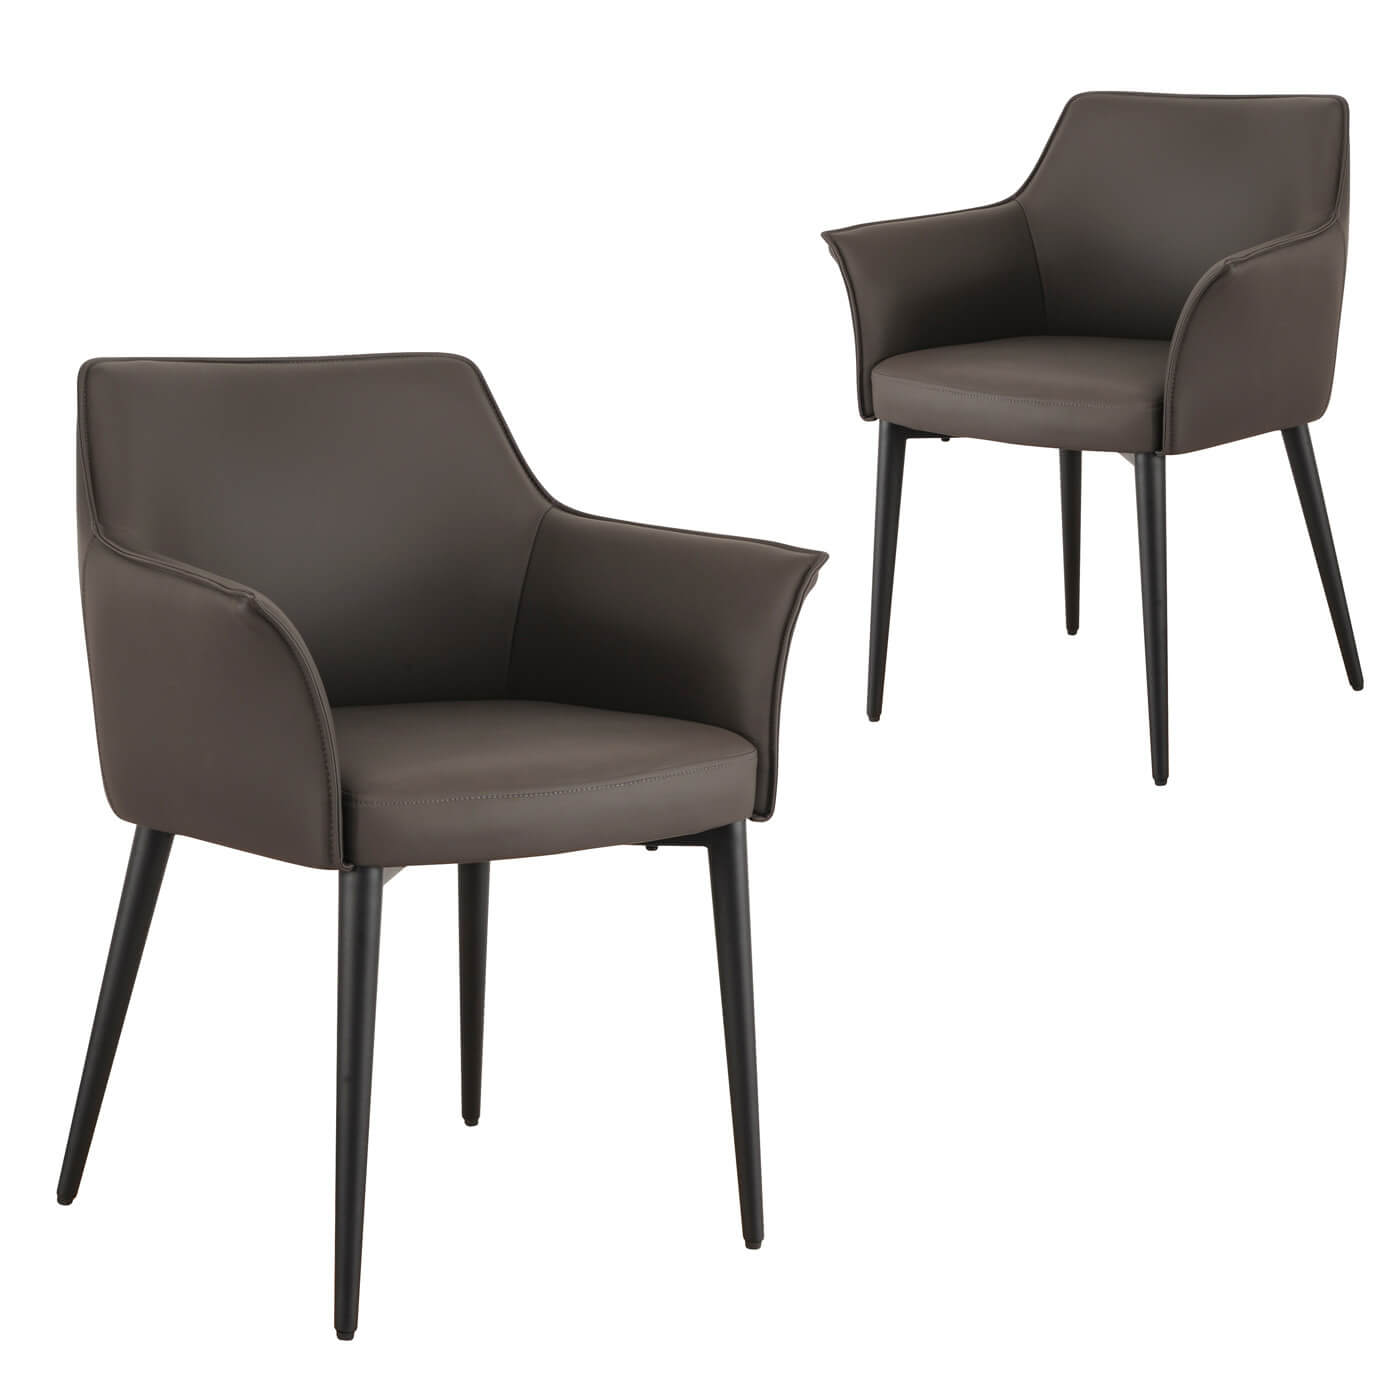 Emporio | Modern Metal PU Leather Dining Chairs With Arms | Set Of 2 | Grey